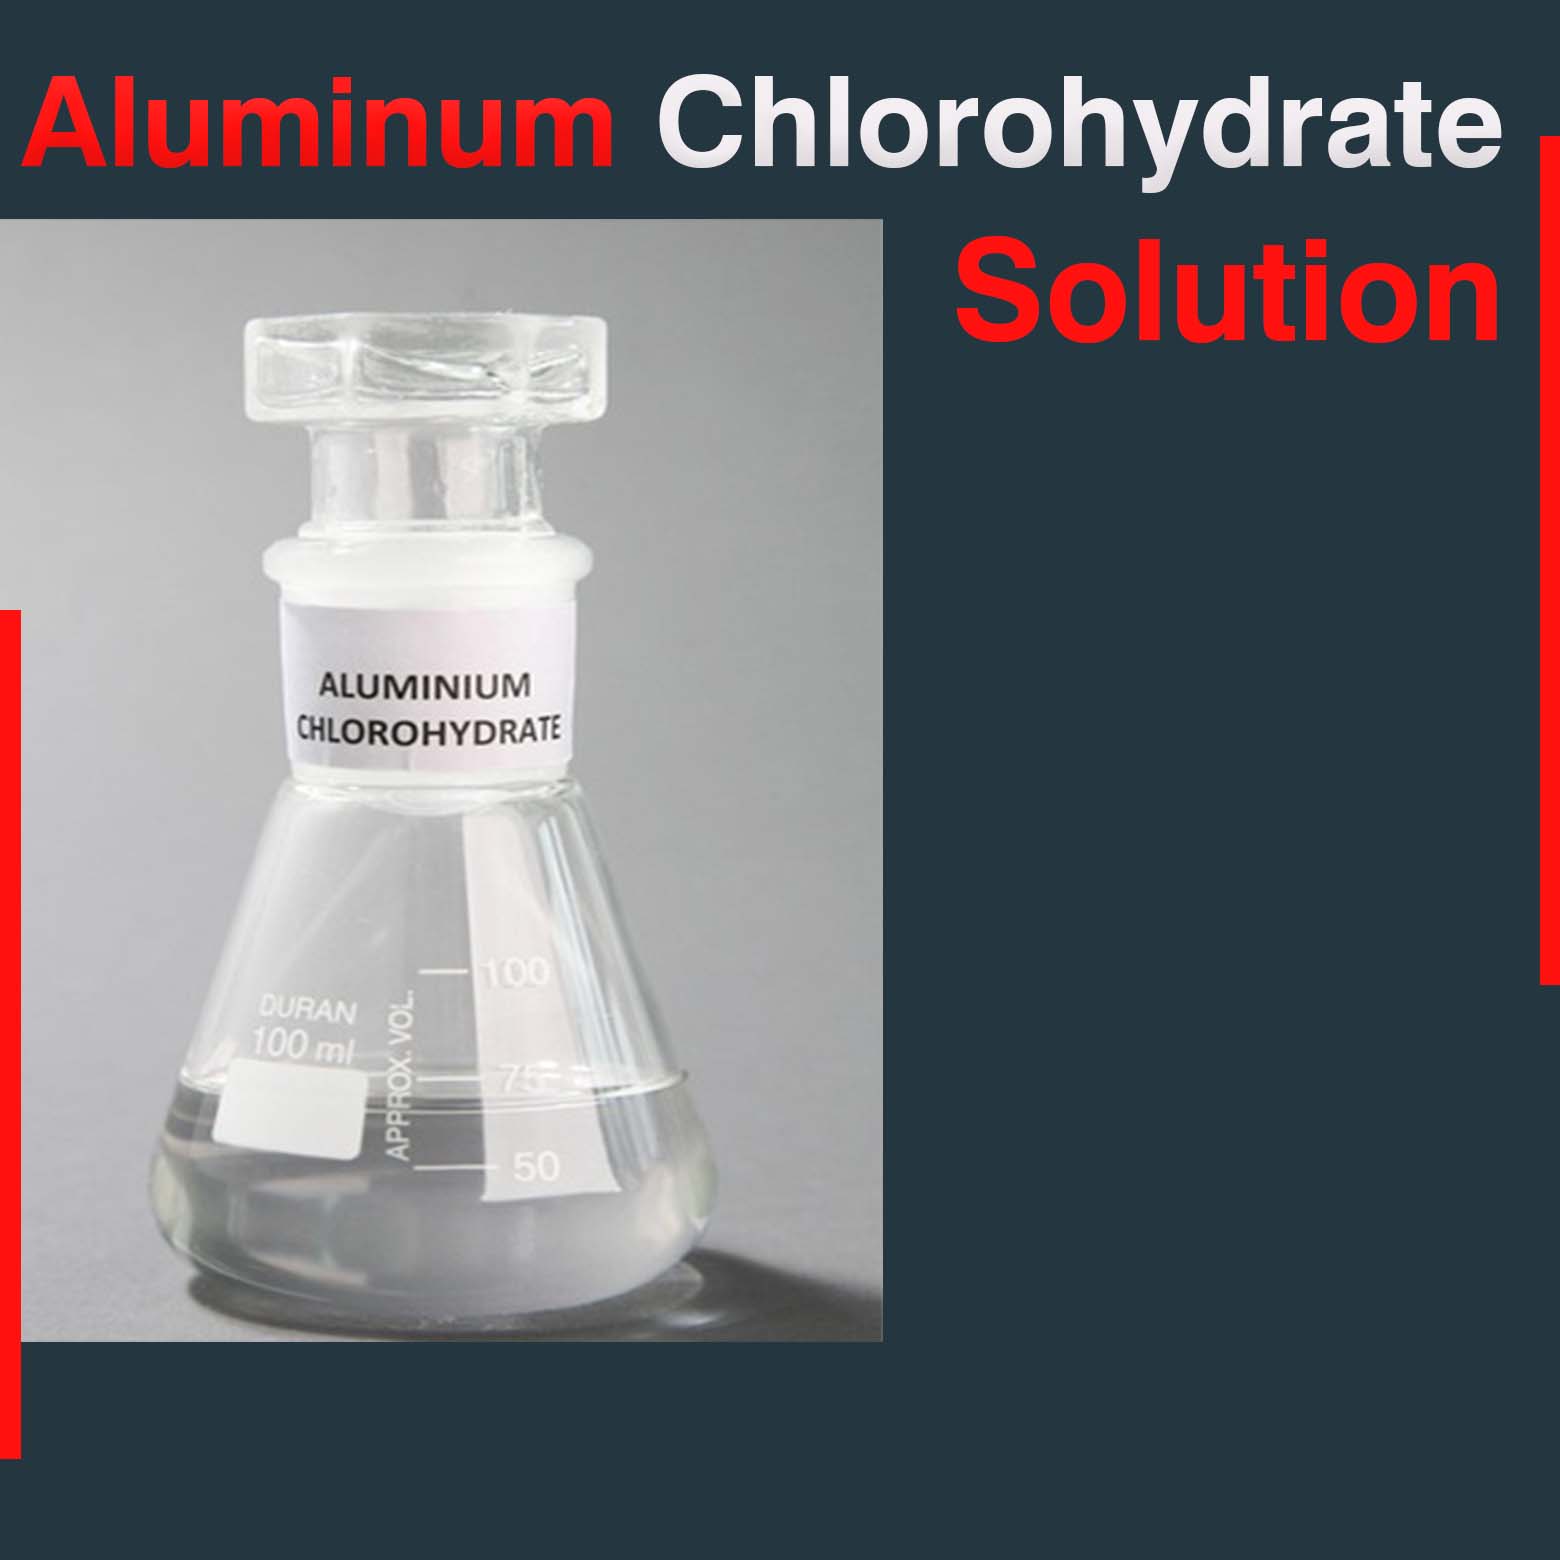 Aluminum Chlorohydrate Solution In Thies